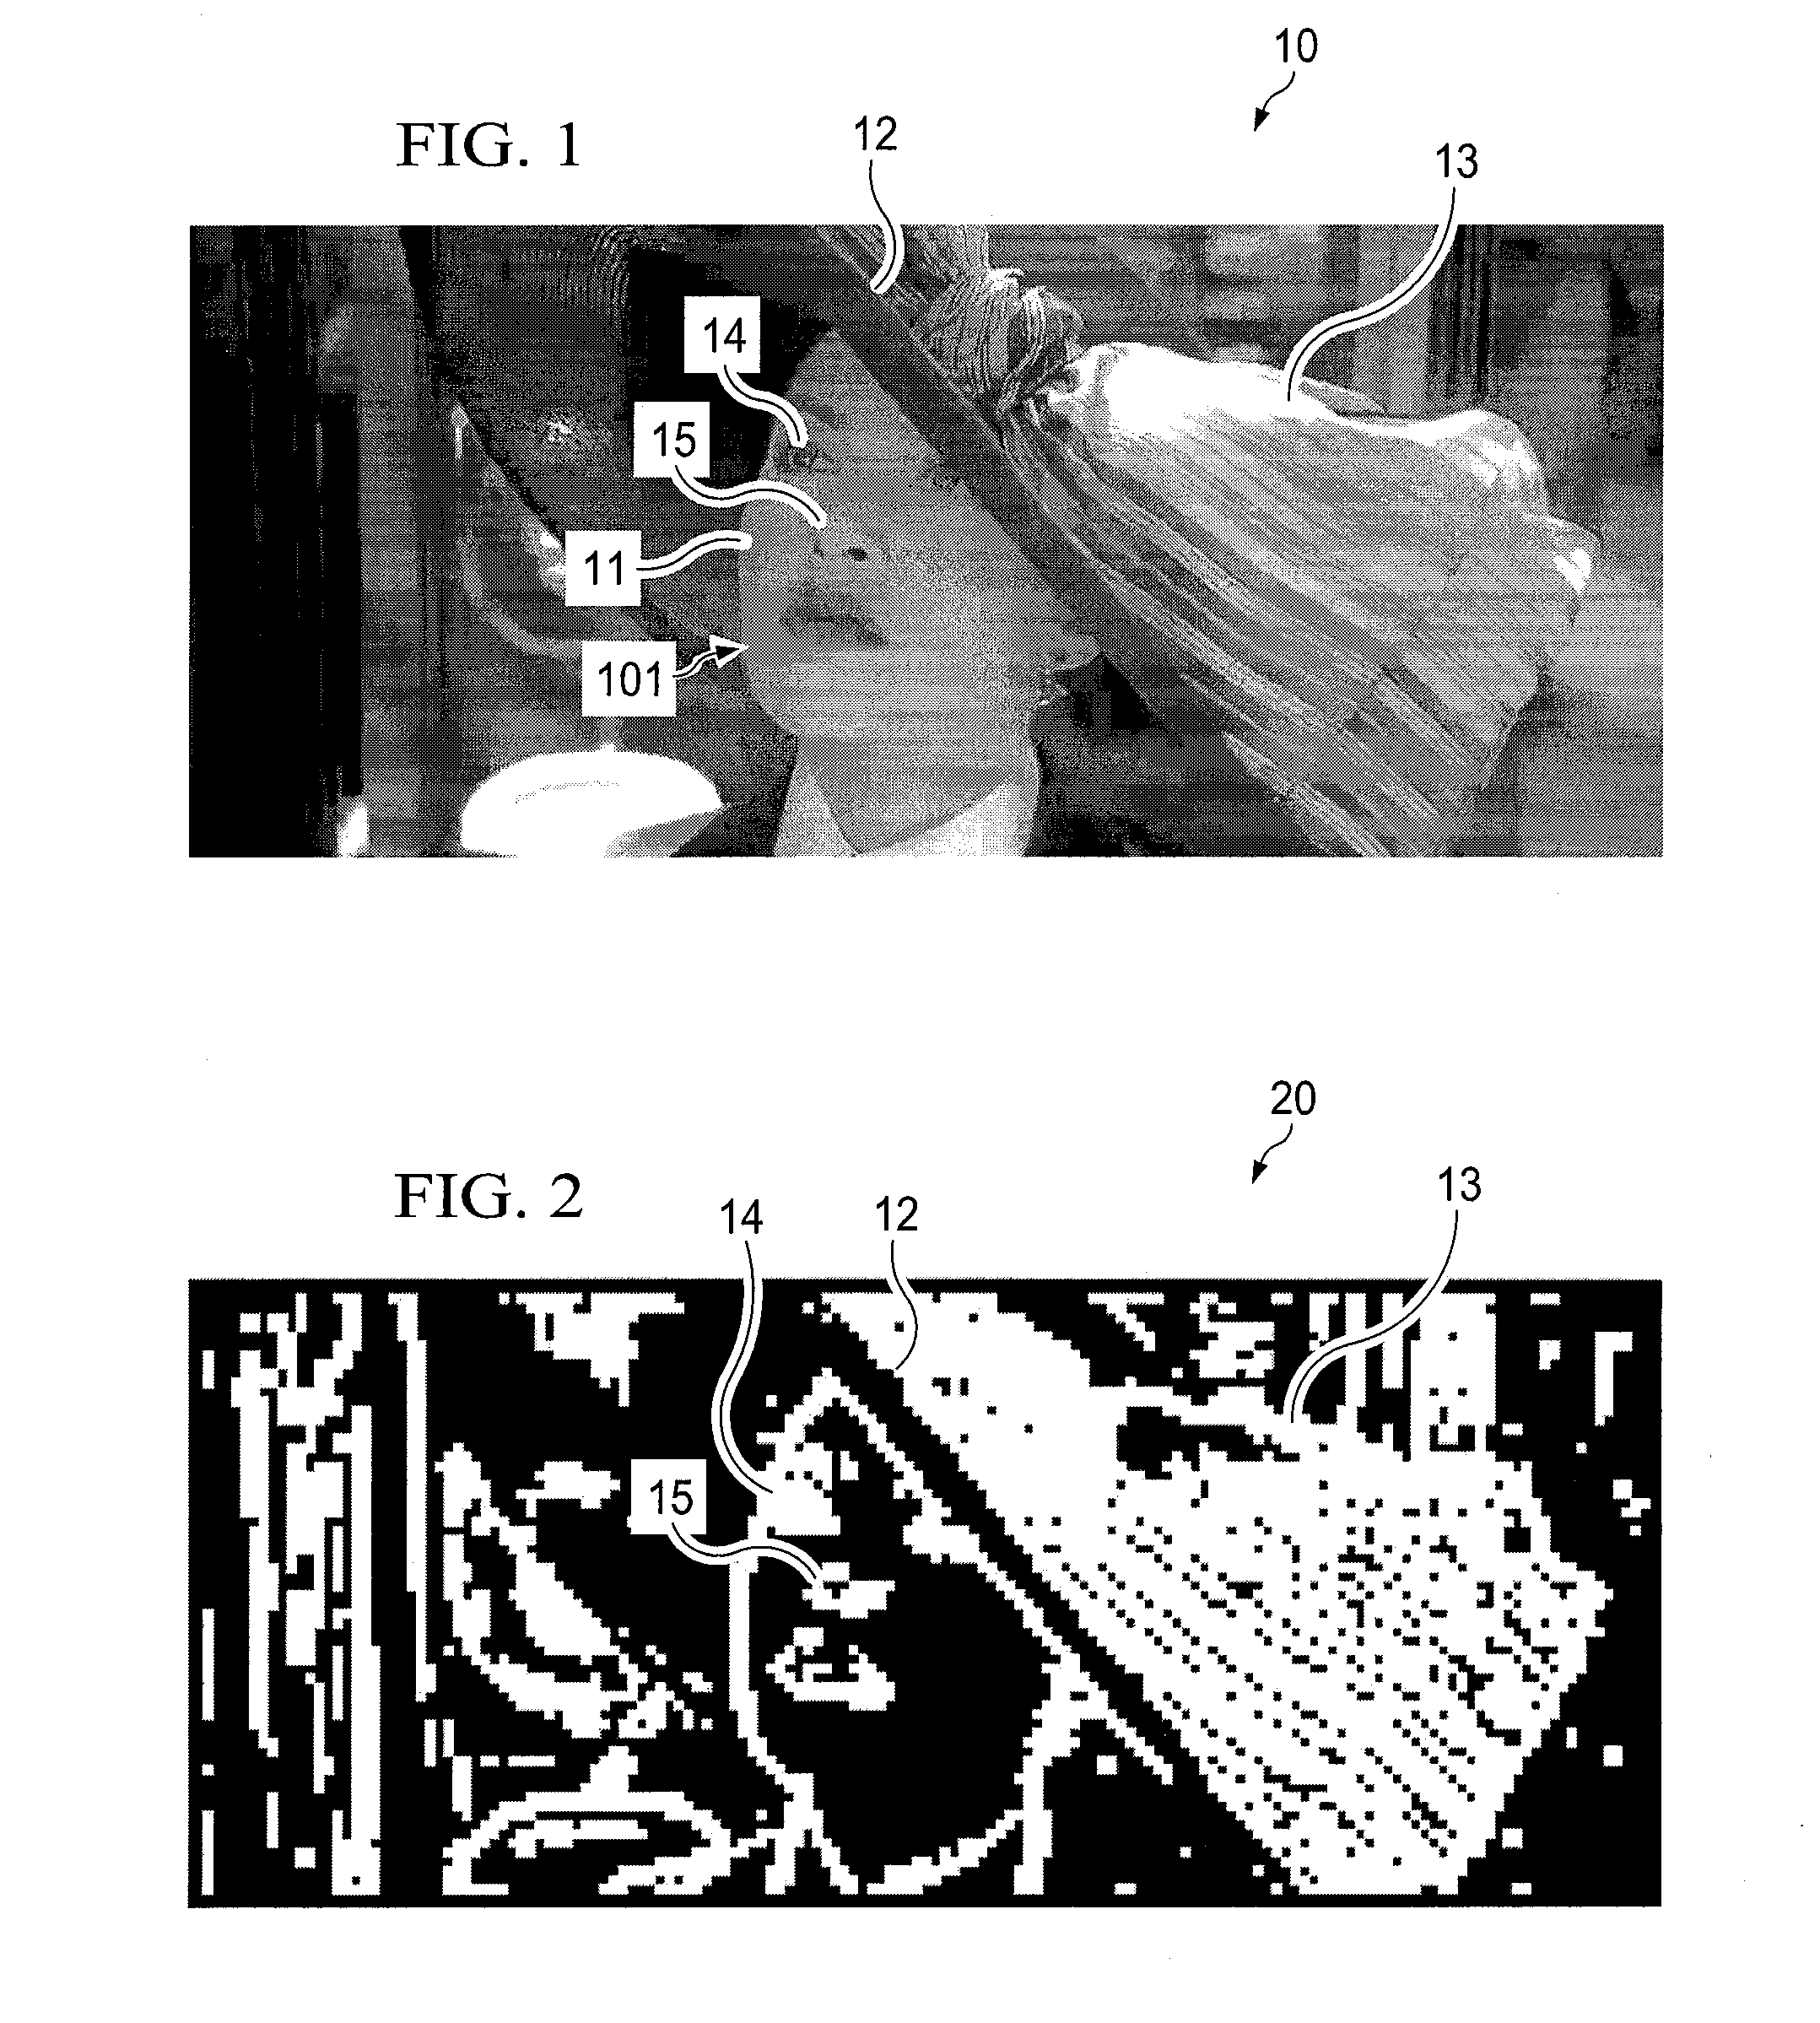 Systems and methods for improving the quality of compressed video signals by smoothing block artifacts